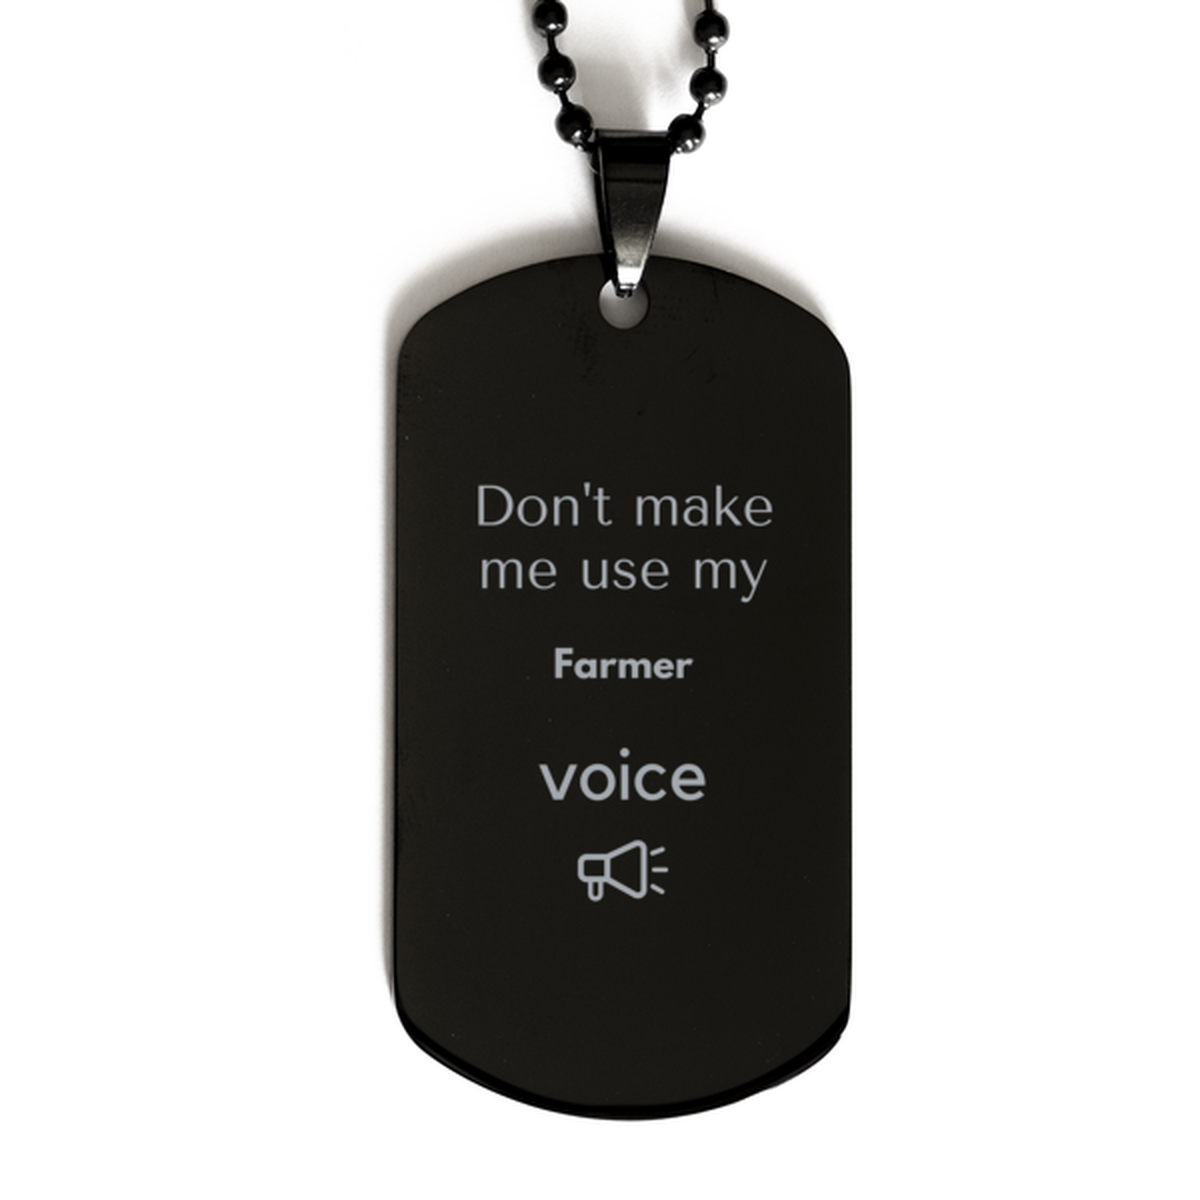 Don't make me use my Farmer voice, Sarcasm Farmer Gifts, Christmas Farmer  Black Dog Tag Birthday Unique Gifts For Farmer Coworkers, Men, Women,  Colleague, Friends